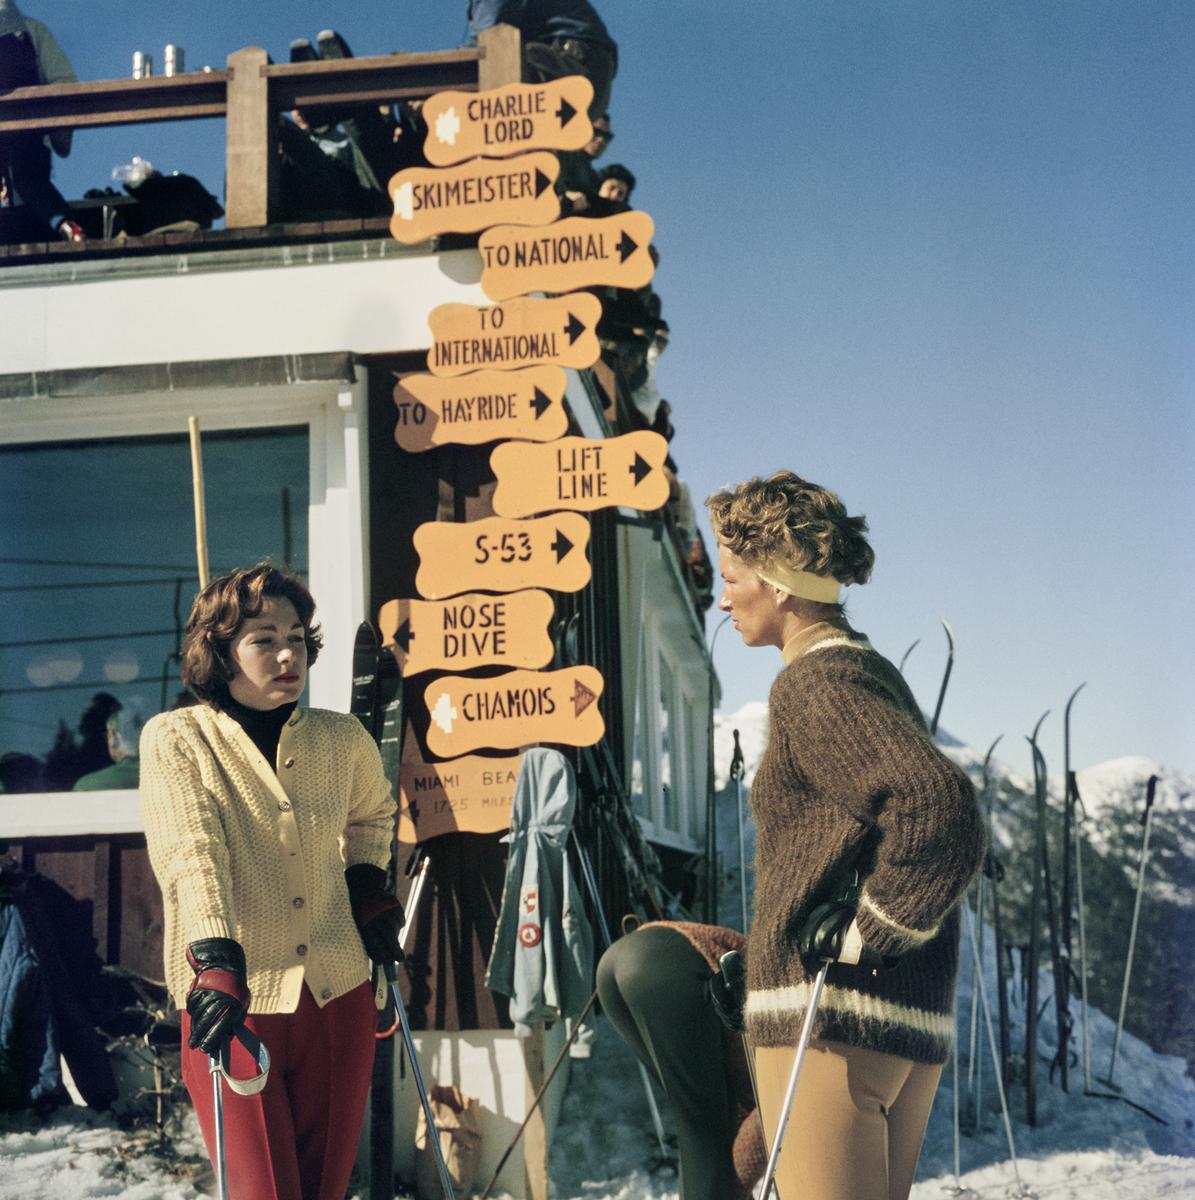 Slim Aarons Estate Print  - Skiing In Stowe


Two women in knitwear, leaning on ski sticks, while standing in the Stowe Mountain ski resort in Stowe, Vermont, 1962. Behind the two women is a sign board offering directions to the resort's